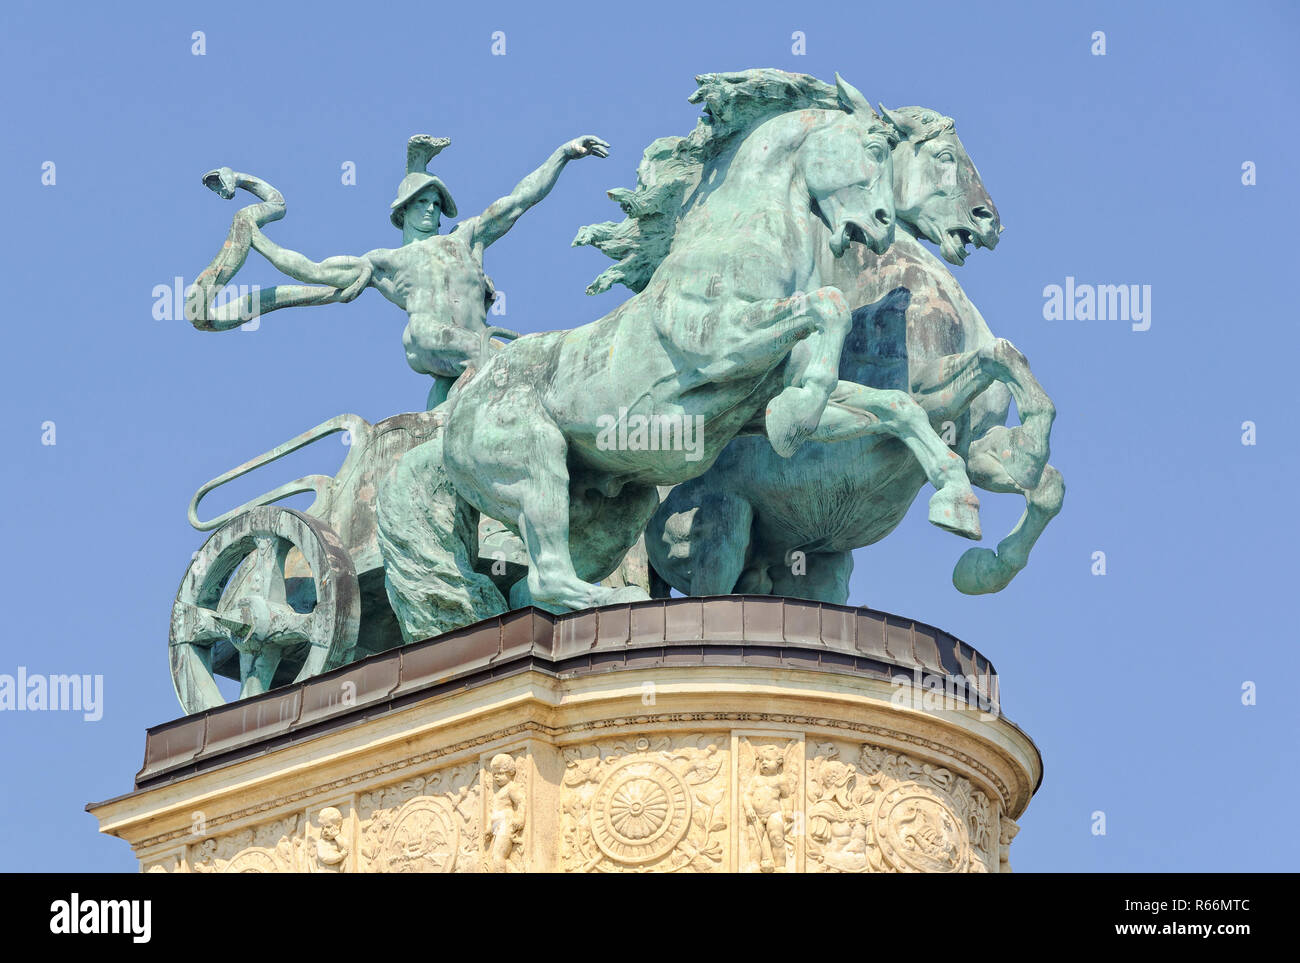 Statue of a Man with a Snake - Budapest Stock Photo